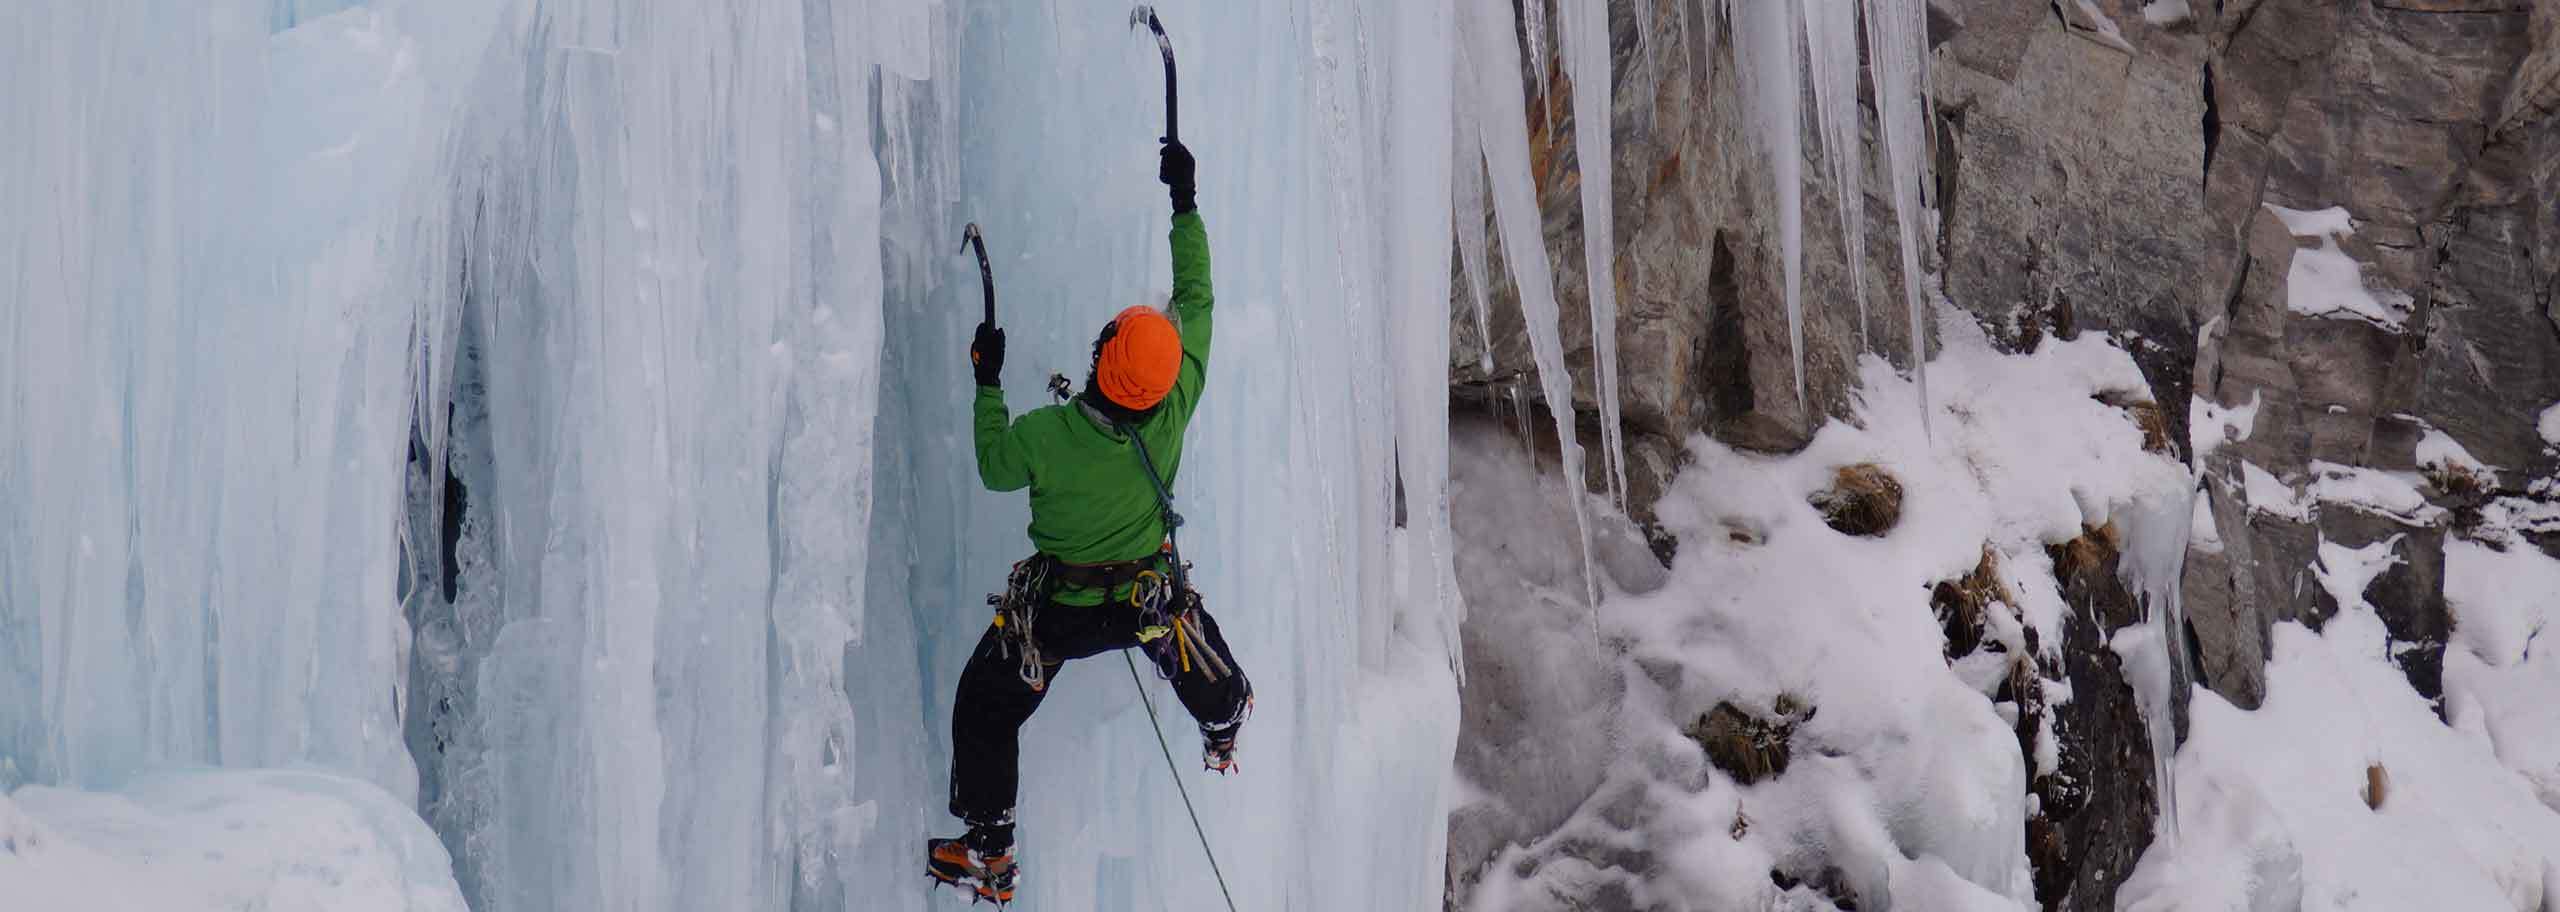 Ice Climbing in Solda, Icefalls Climbing in the Ortler Alps